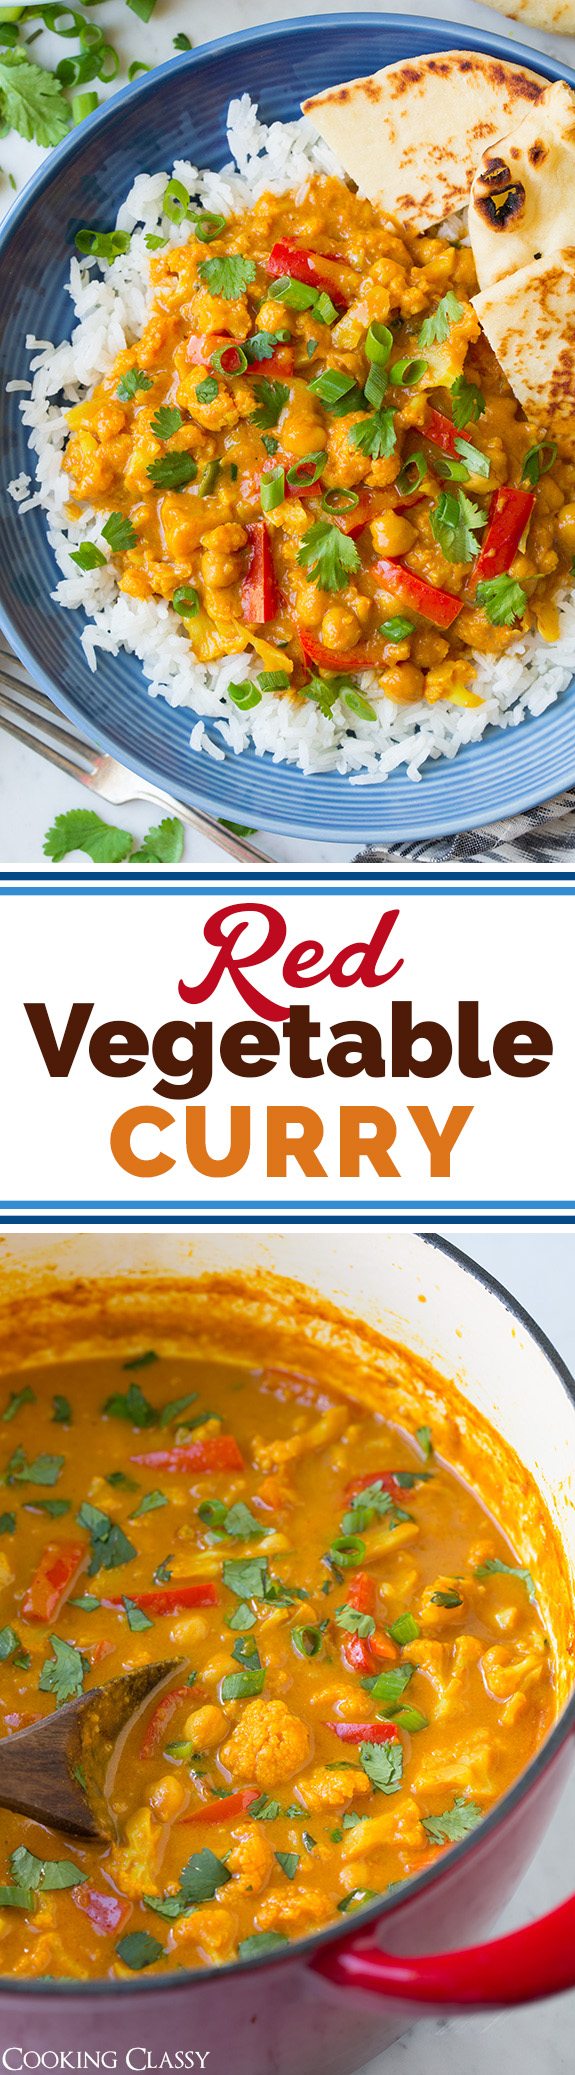 Vegetable Curry (Easy Red Curry Recipe) - Cooking Classy